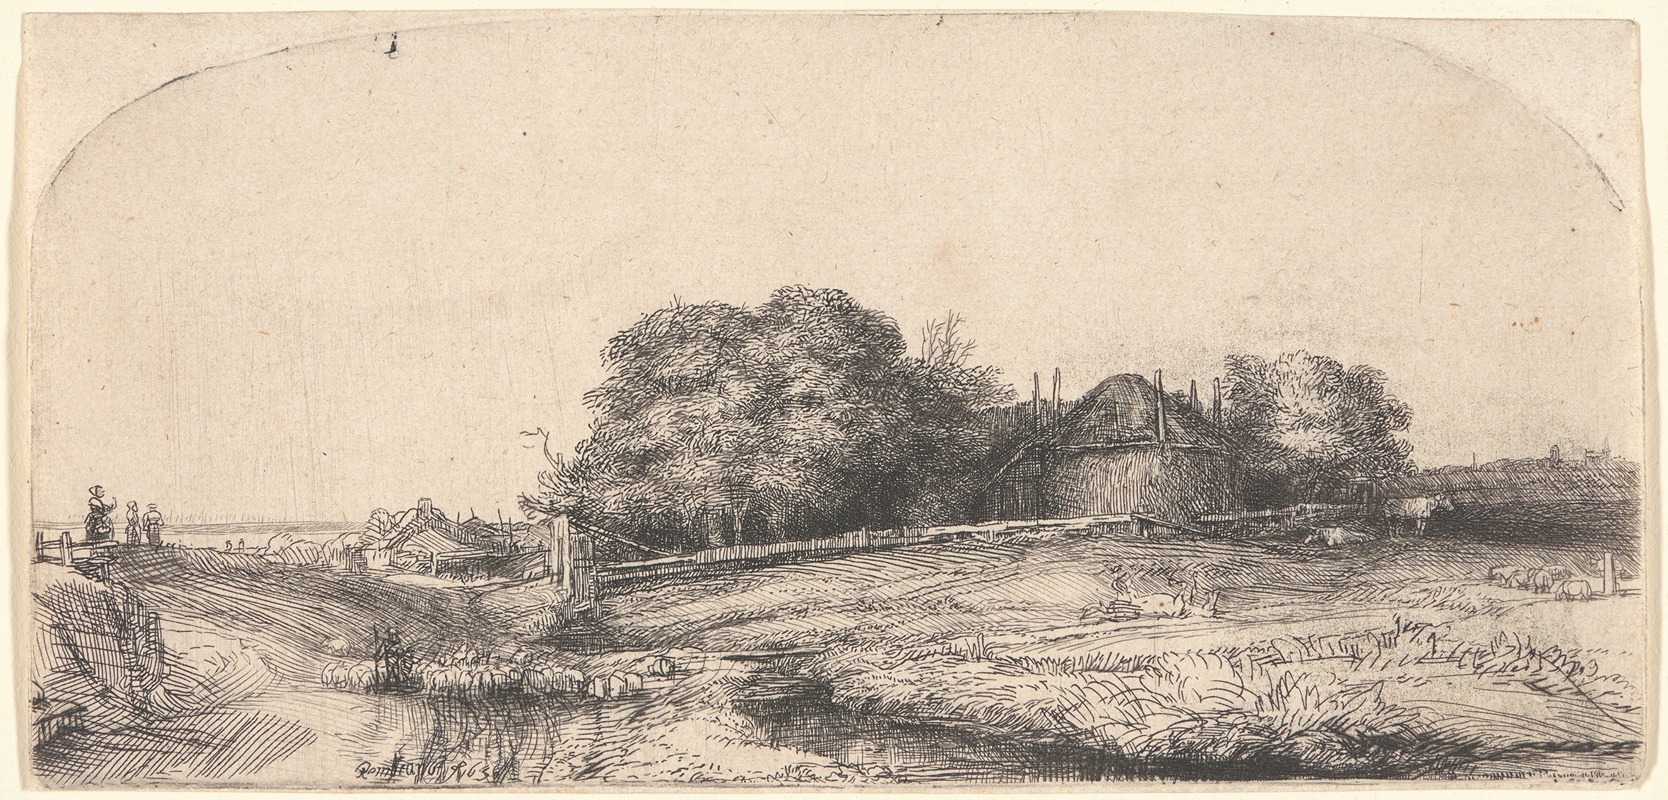 Rembrandt van Rijn - Landscape with a Hay Barn and a Flock of Sheep